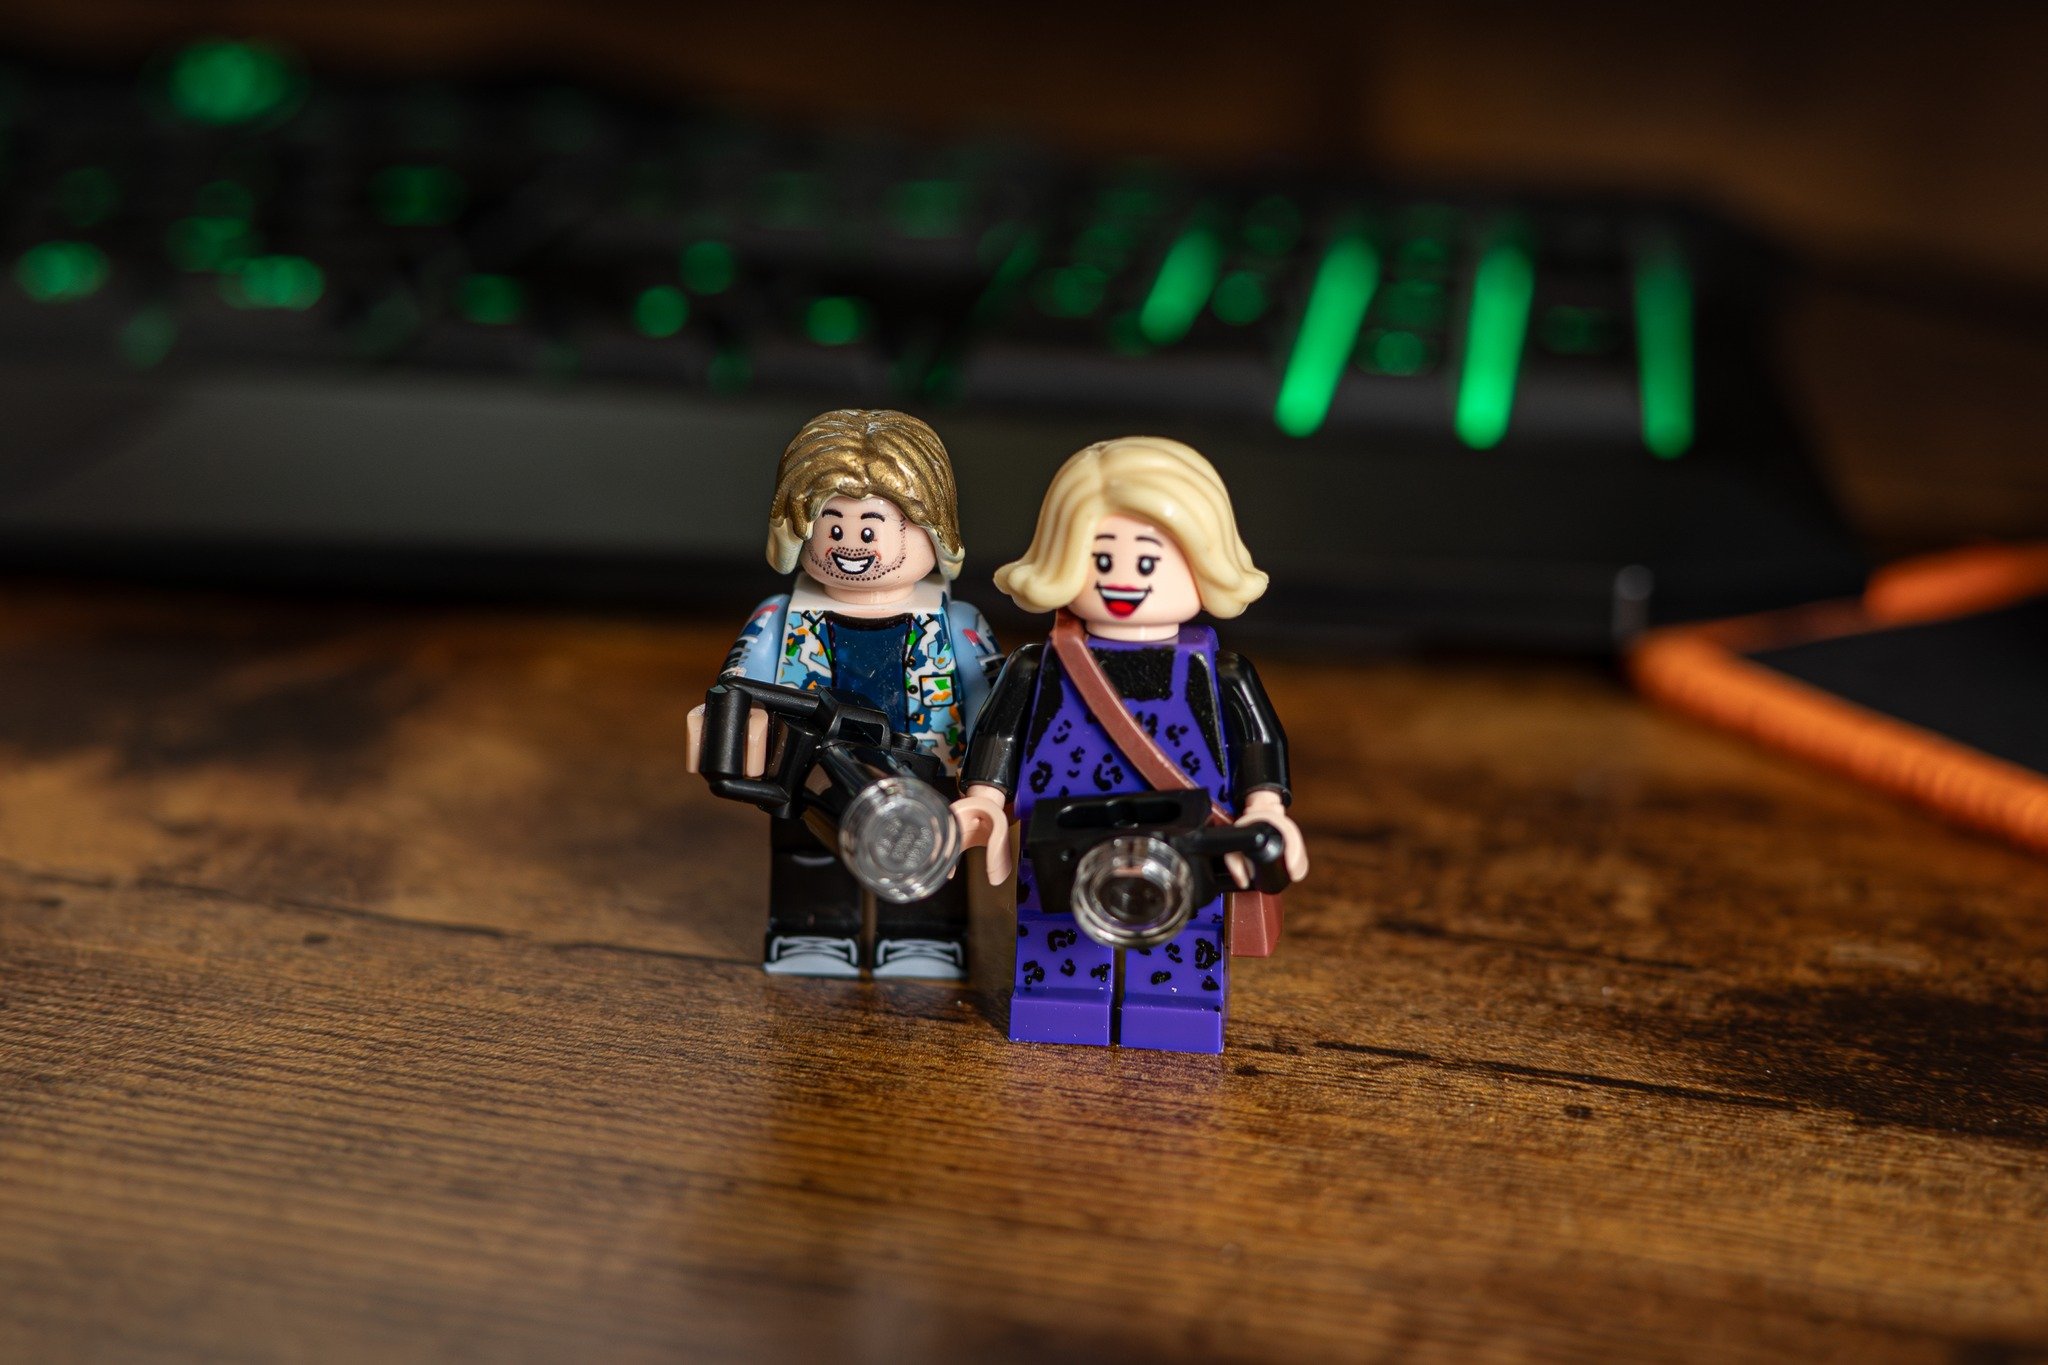 We've shrunk in the wash! 

We have just had these amazing Lego minifigure versions of us made by the incredible @lammidge_designs. Look out for our miniature selves out on photography adventures with us from now on.

They've been custom-designed and